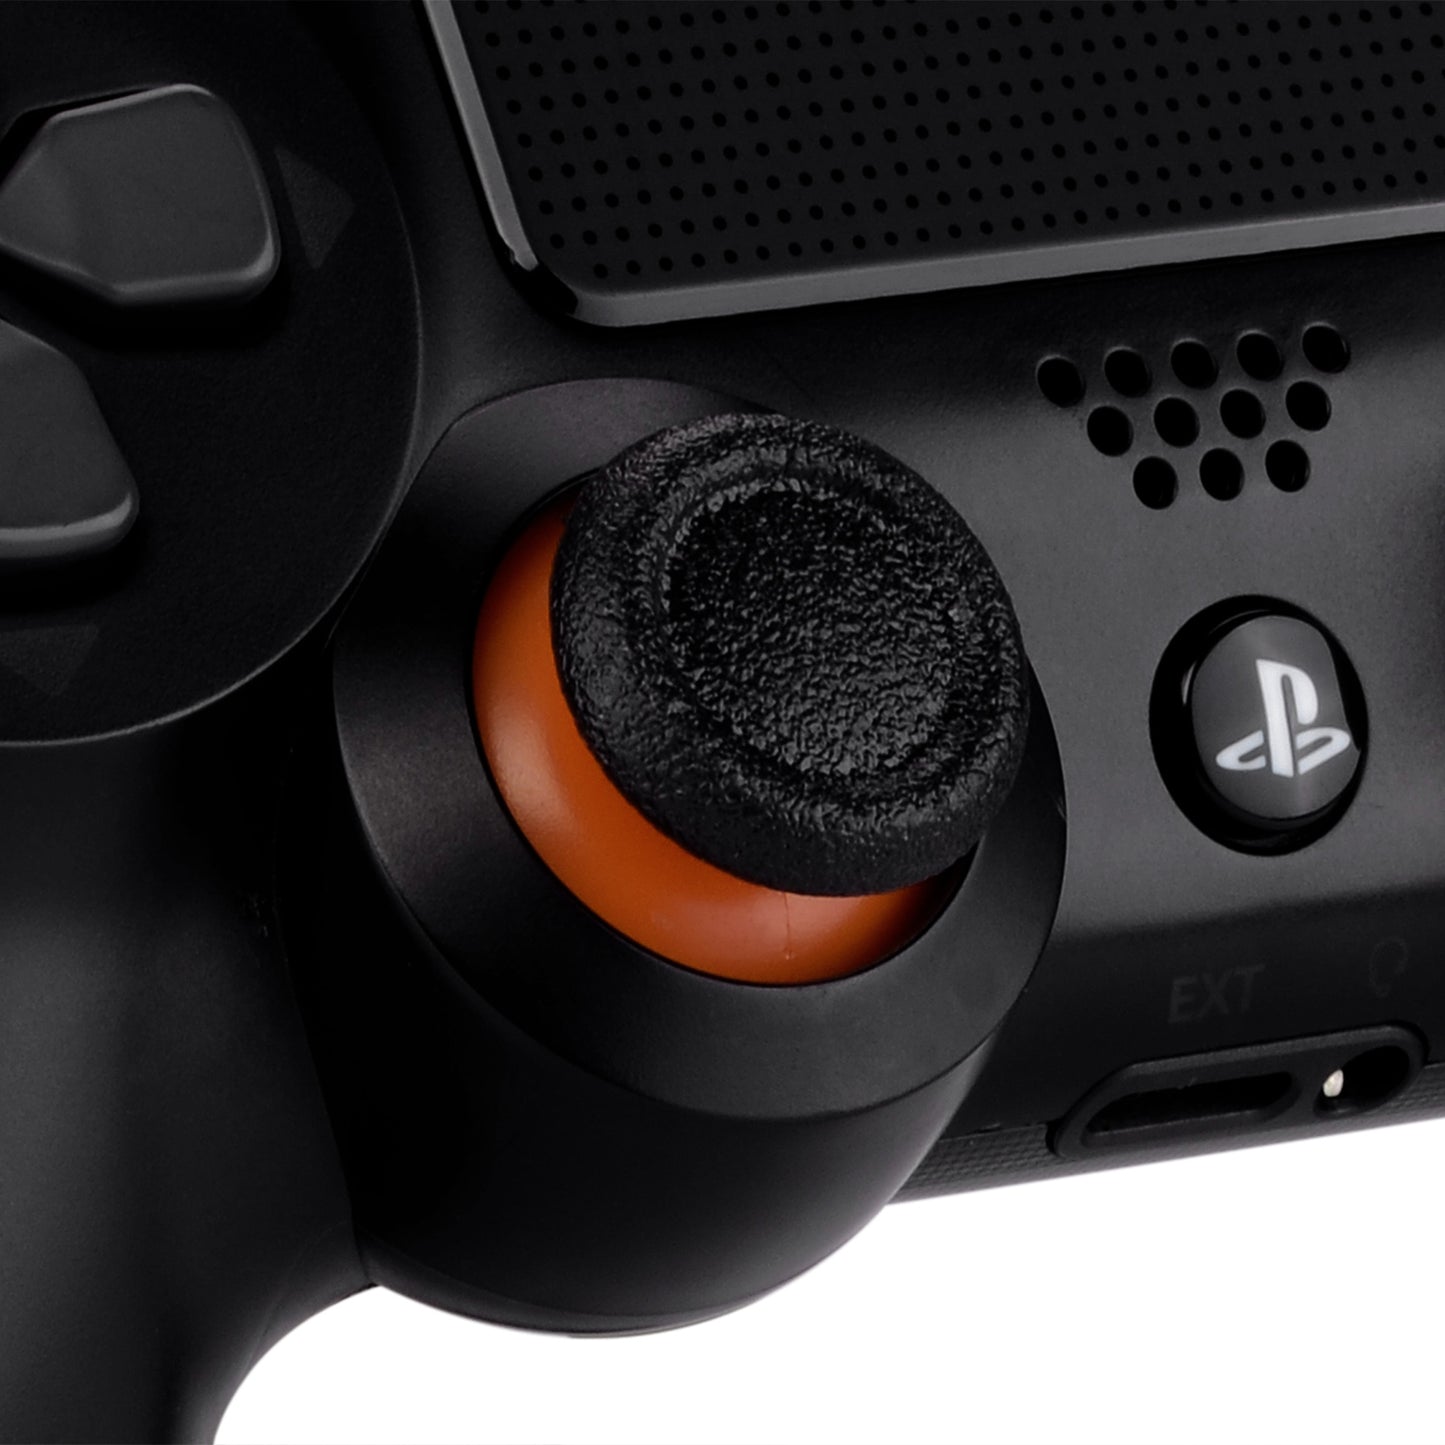 eXtremeRate Dual-Color Replacement 3D Joystick Thumbsticks Compatible with PS4 Slim Pro Controller - Black & Orange eXtremeRate